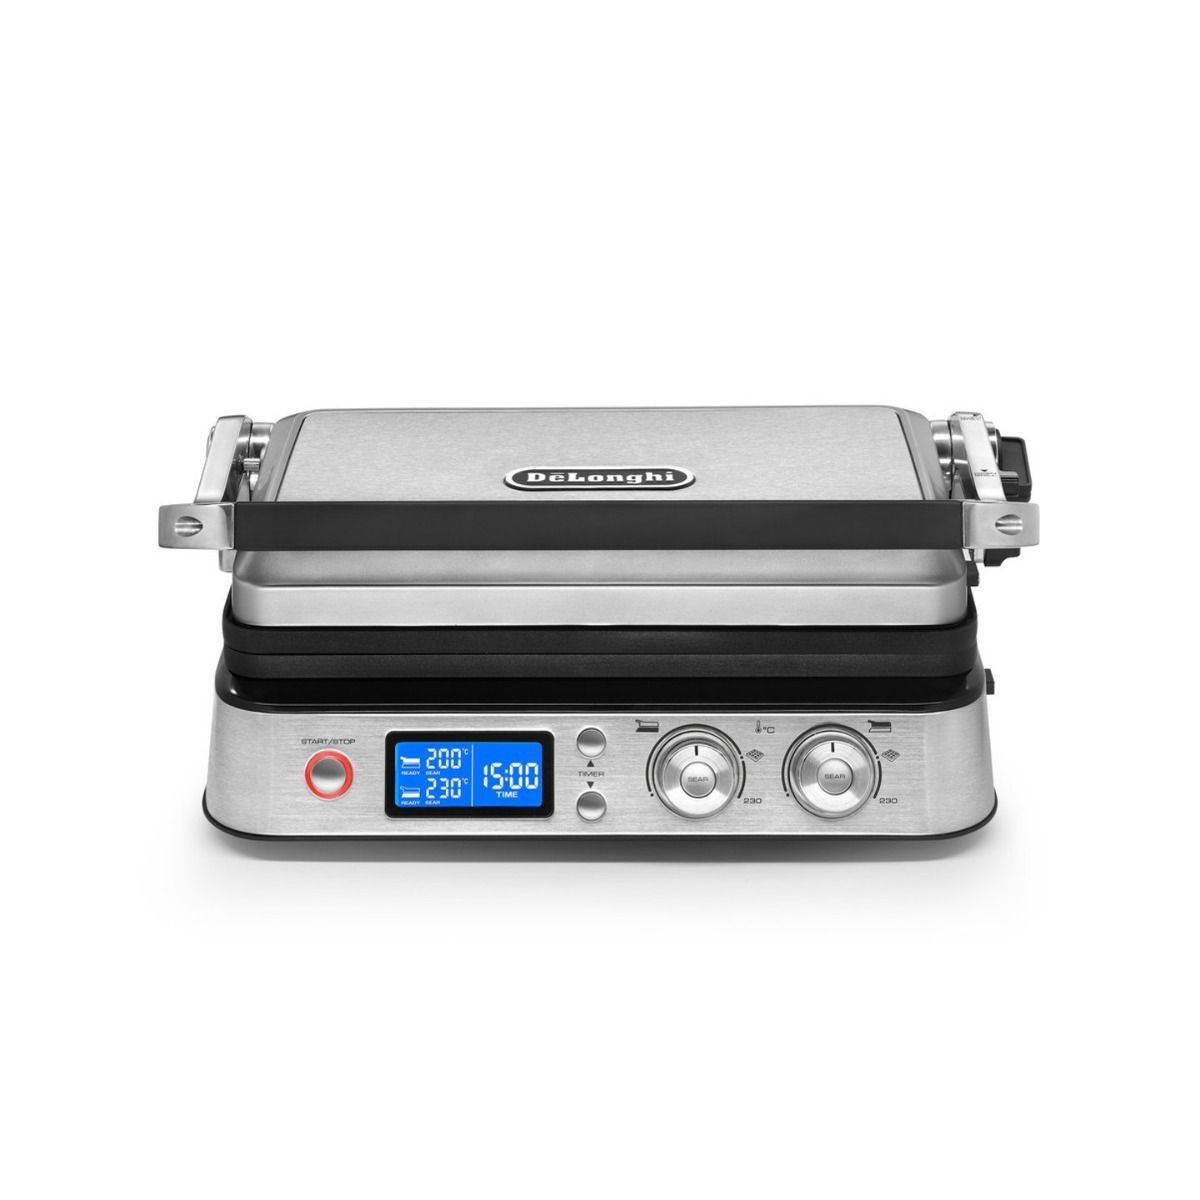 Electrical Grill - Blue Diamond brand - appliances - by owner